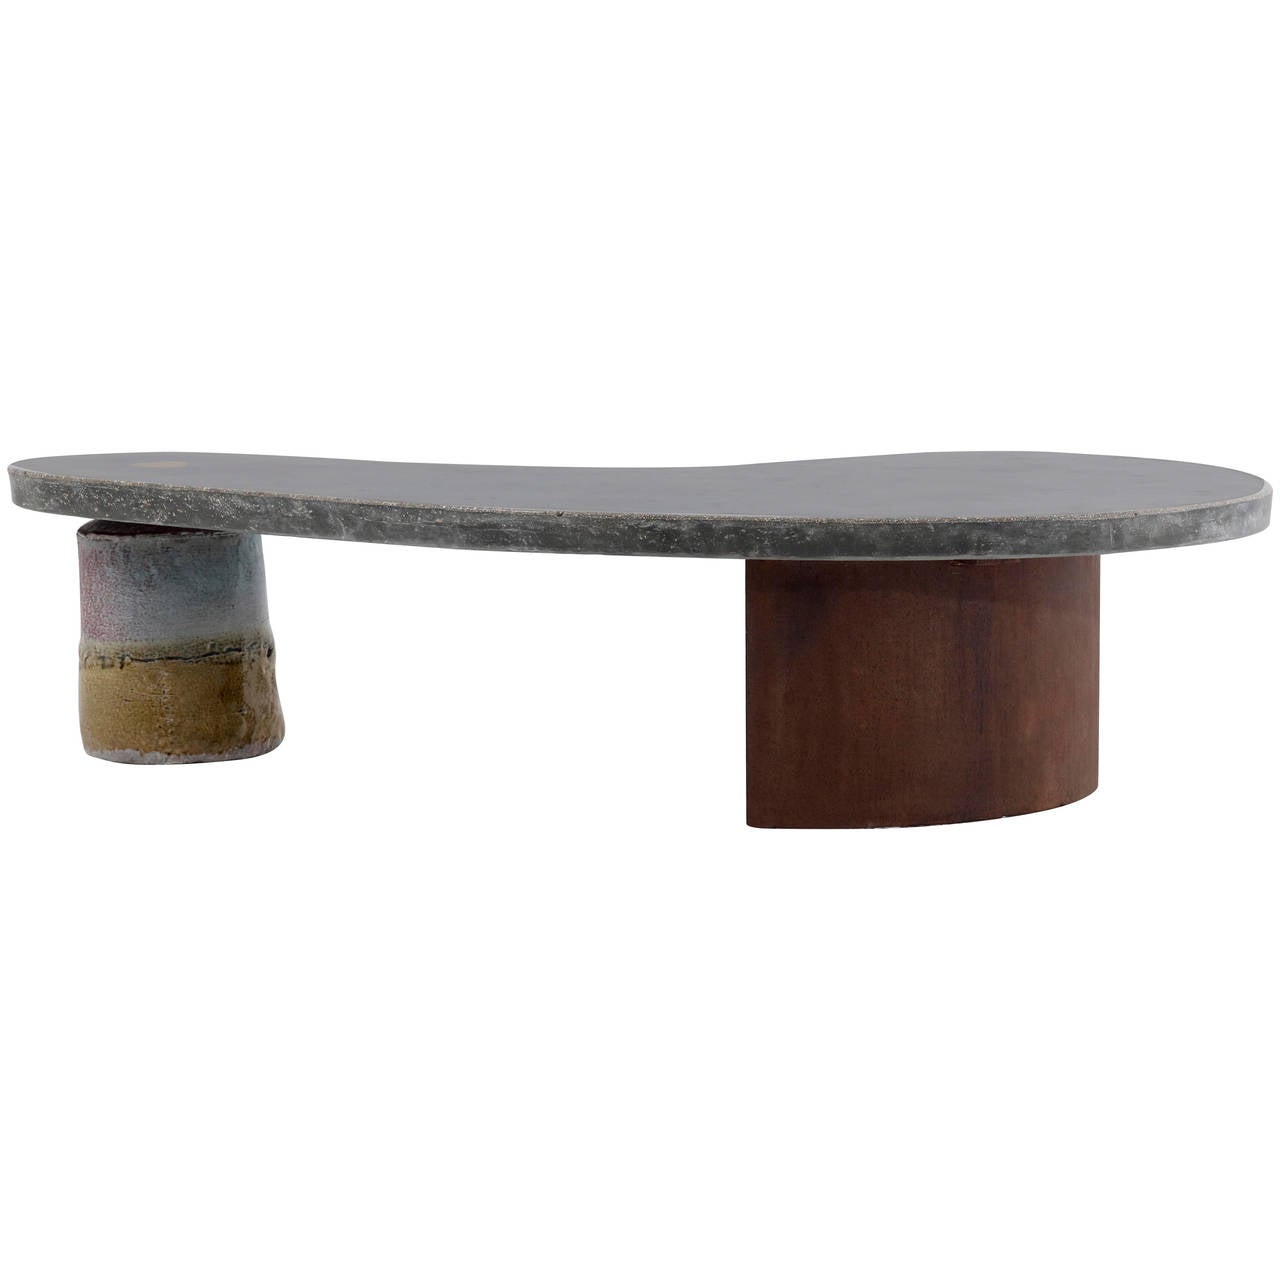 Organic Lined Concrete Bench by Lee Hun Chung, 2012 For Sale